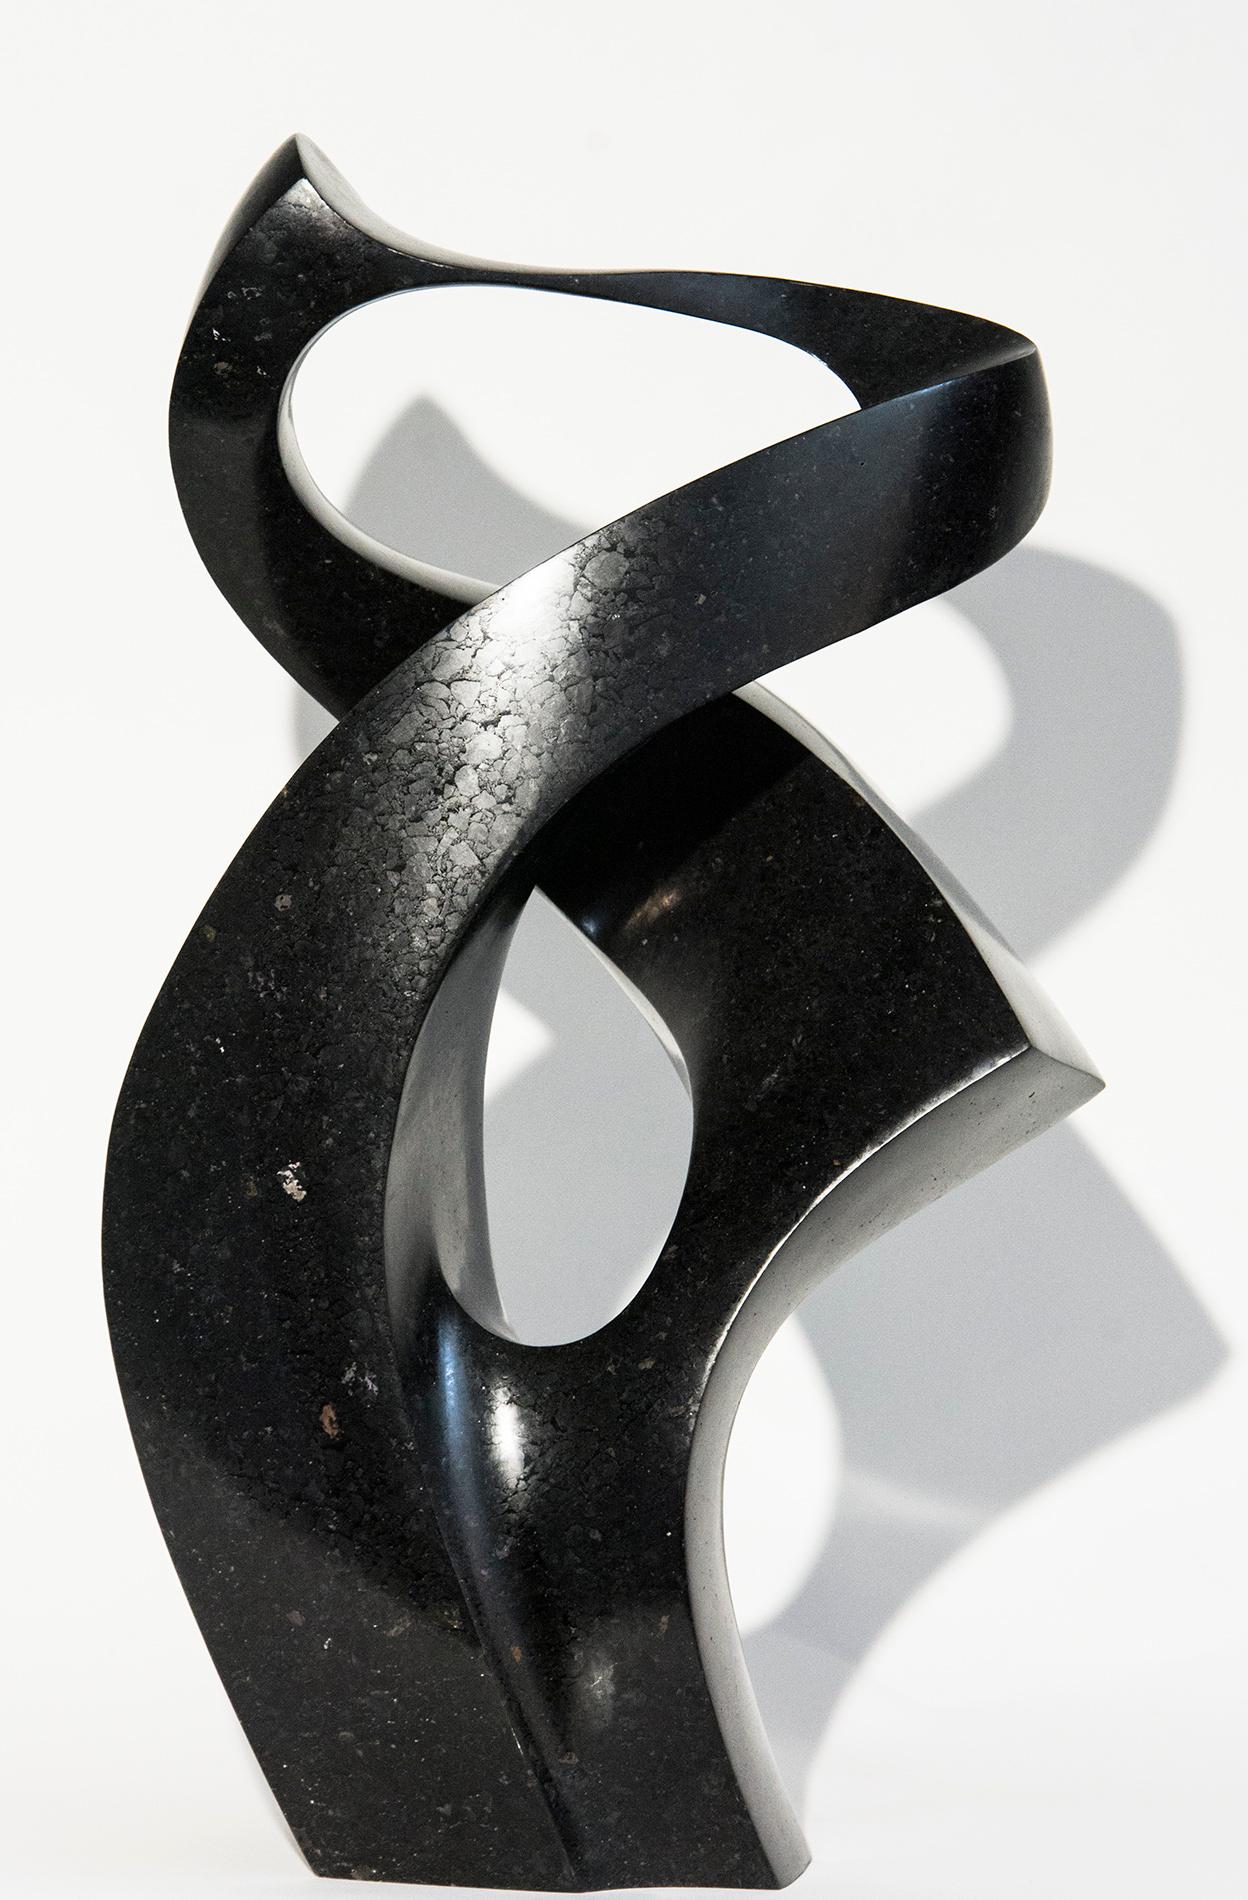 Embrace 1/50 - small, smooth, polished, abstract, black granite sculpture - Sculpture by Jeremy Guy